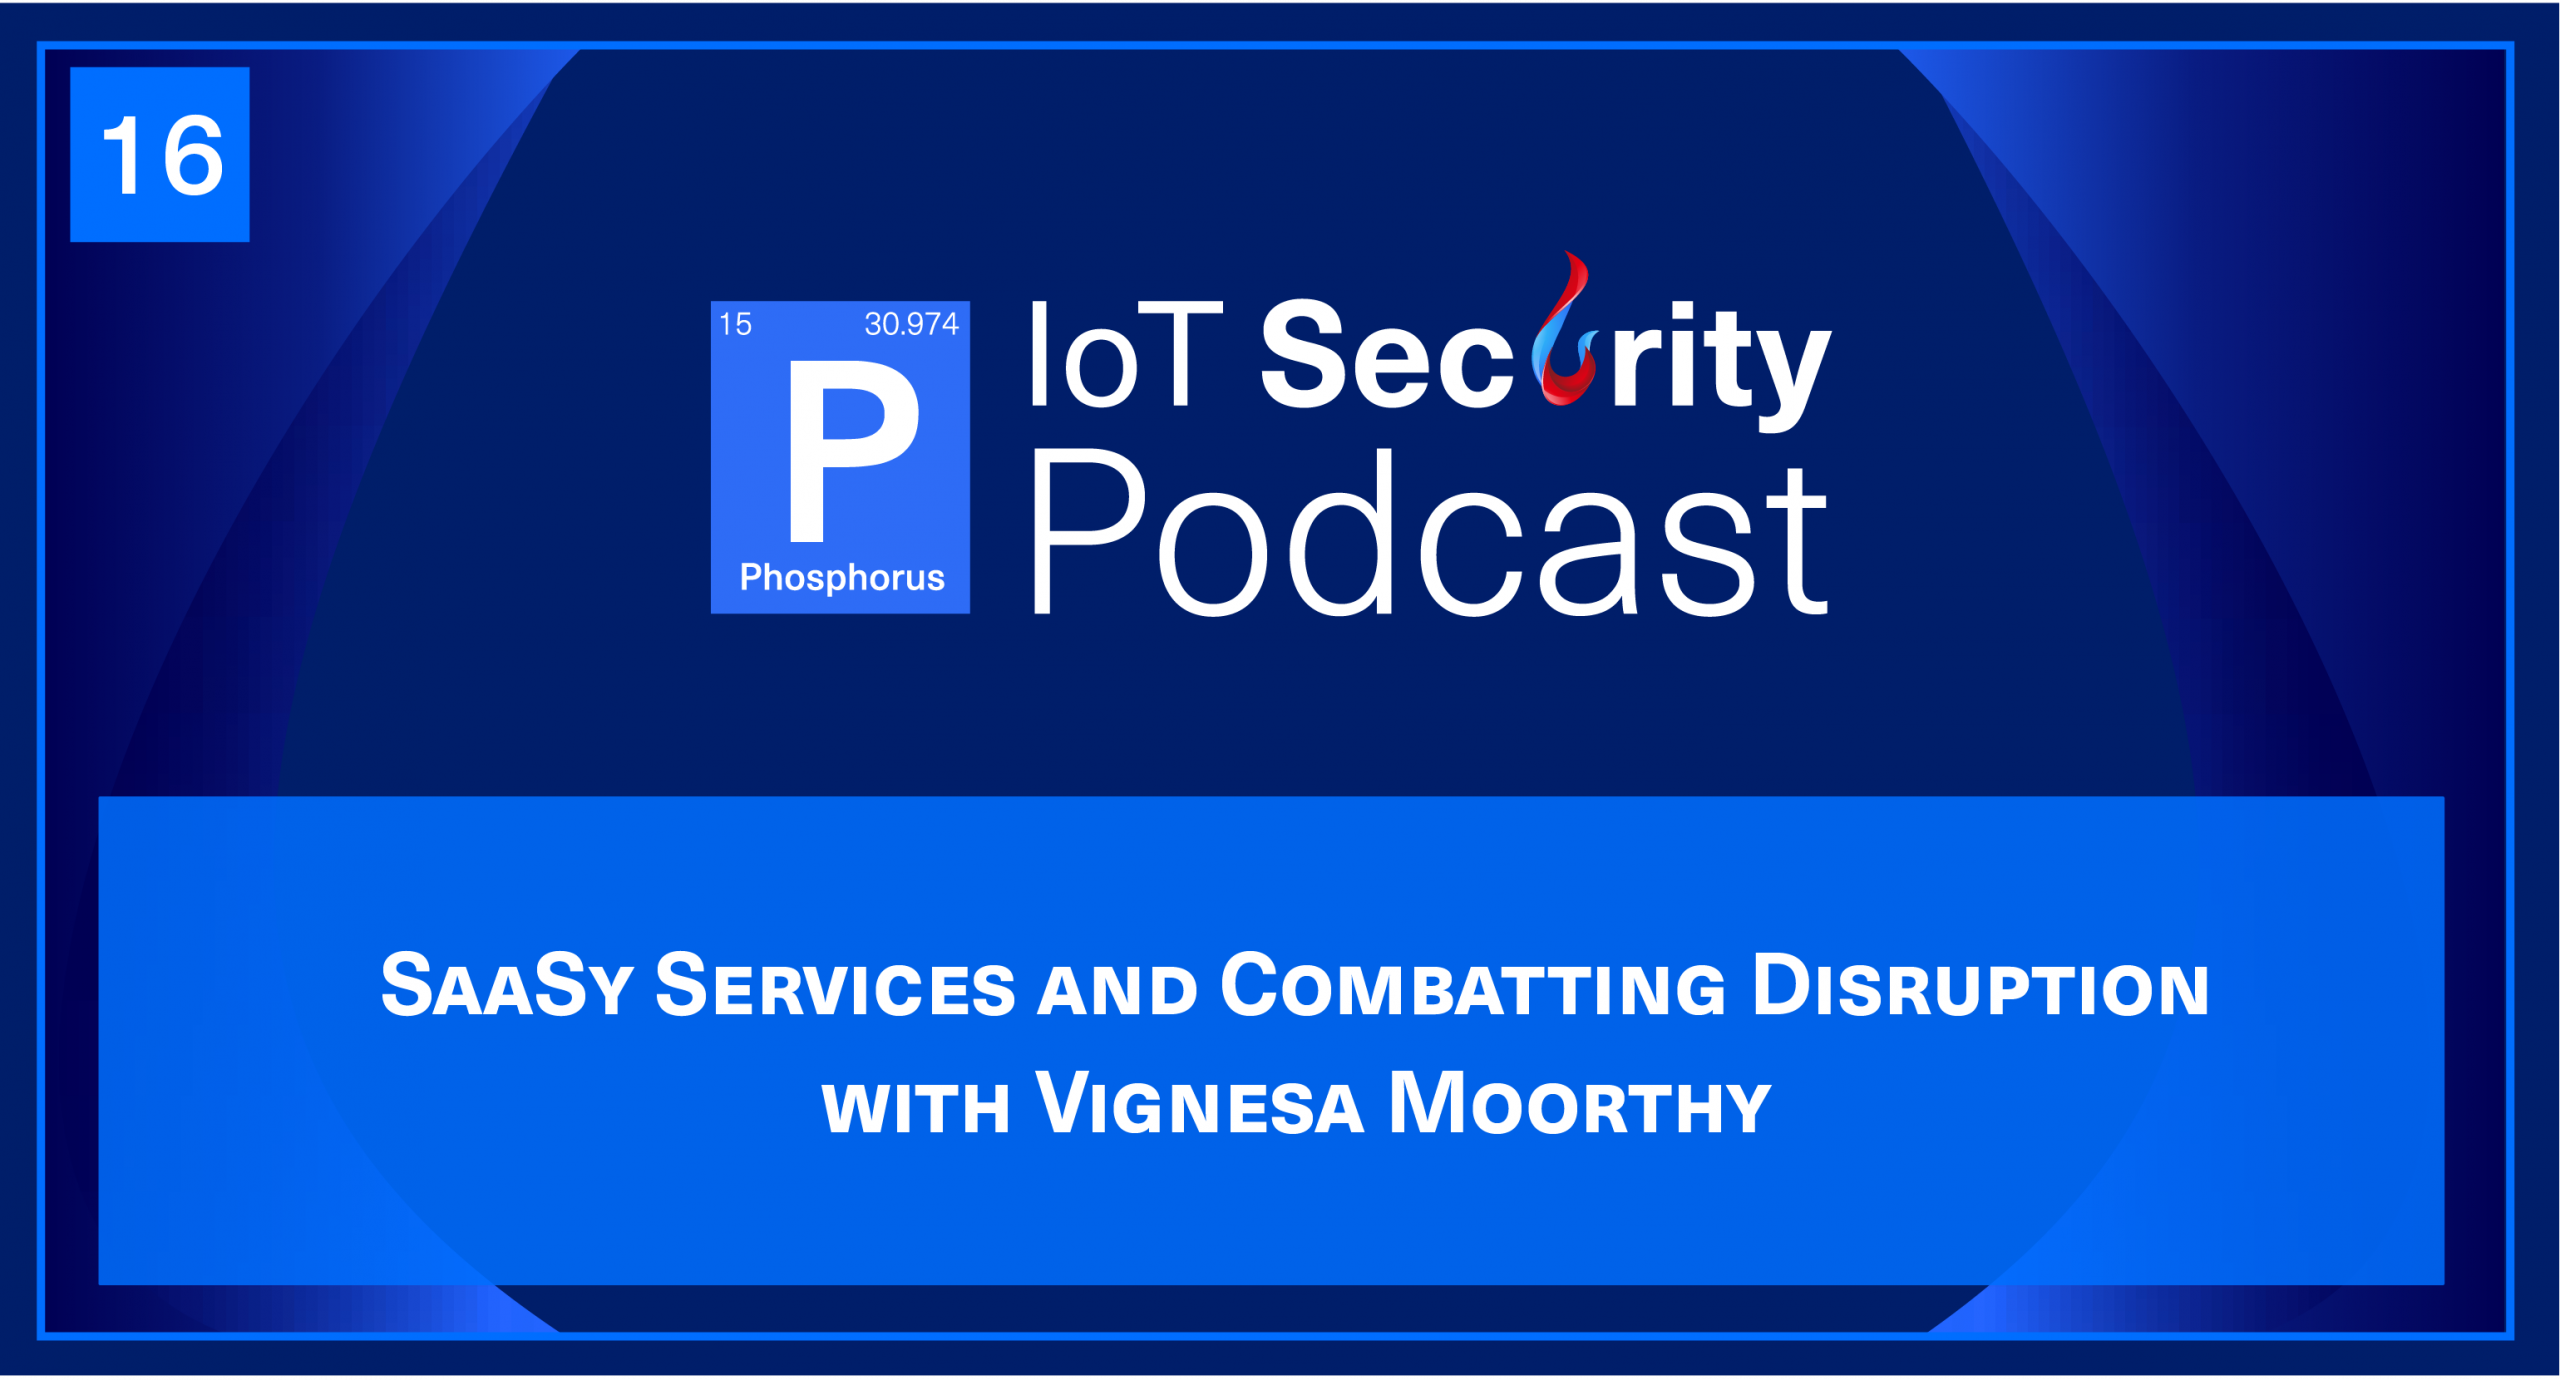 SaaSy Services and Combatting Disruption with Vignesa Moorthy